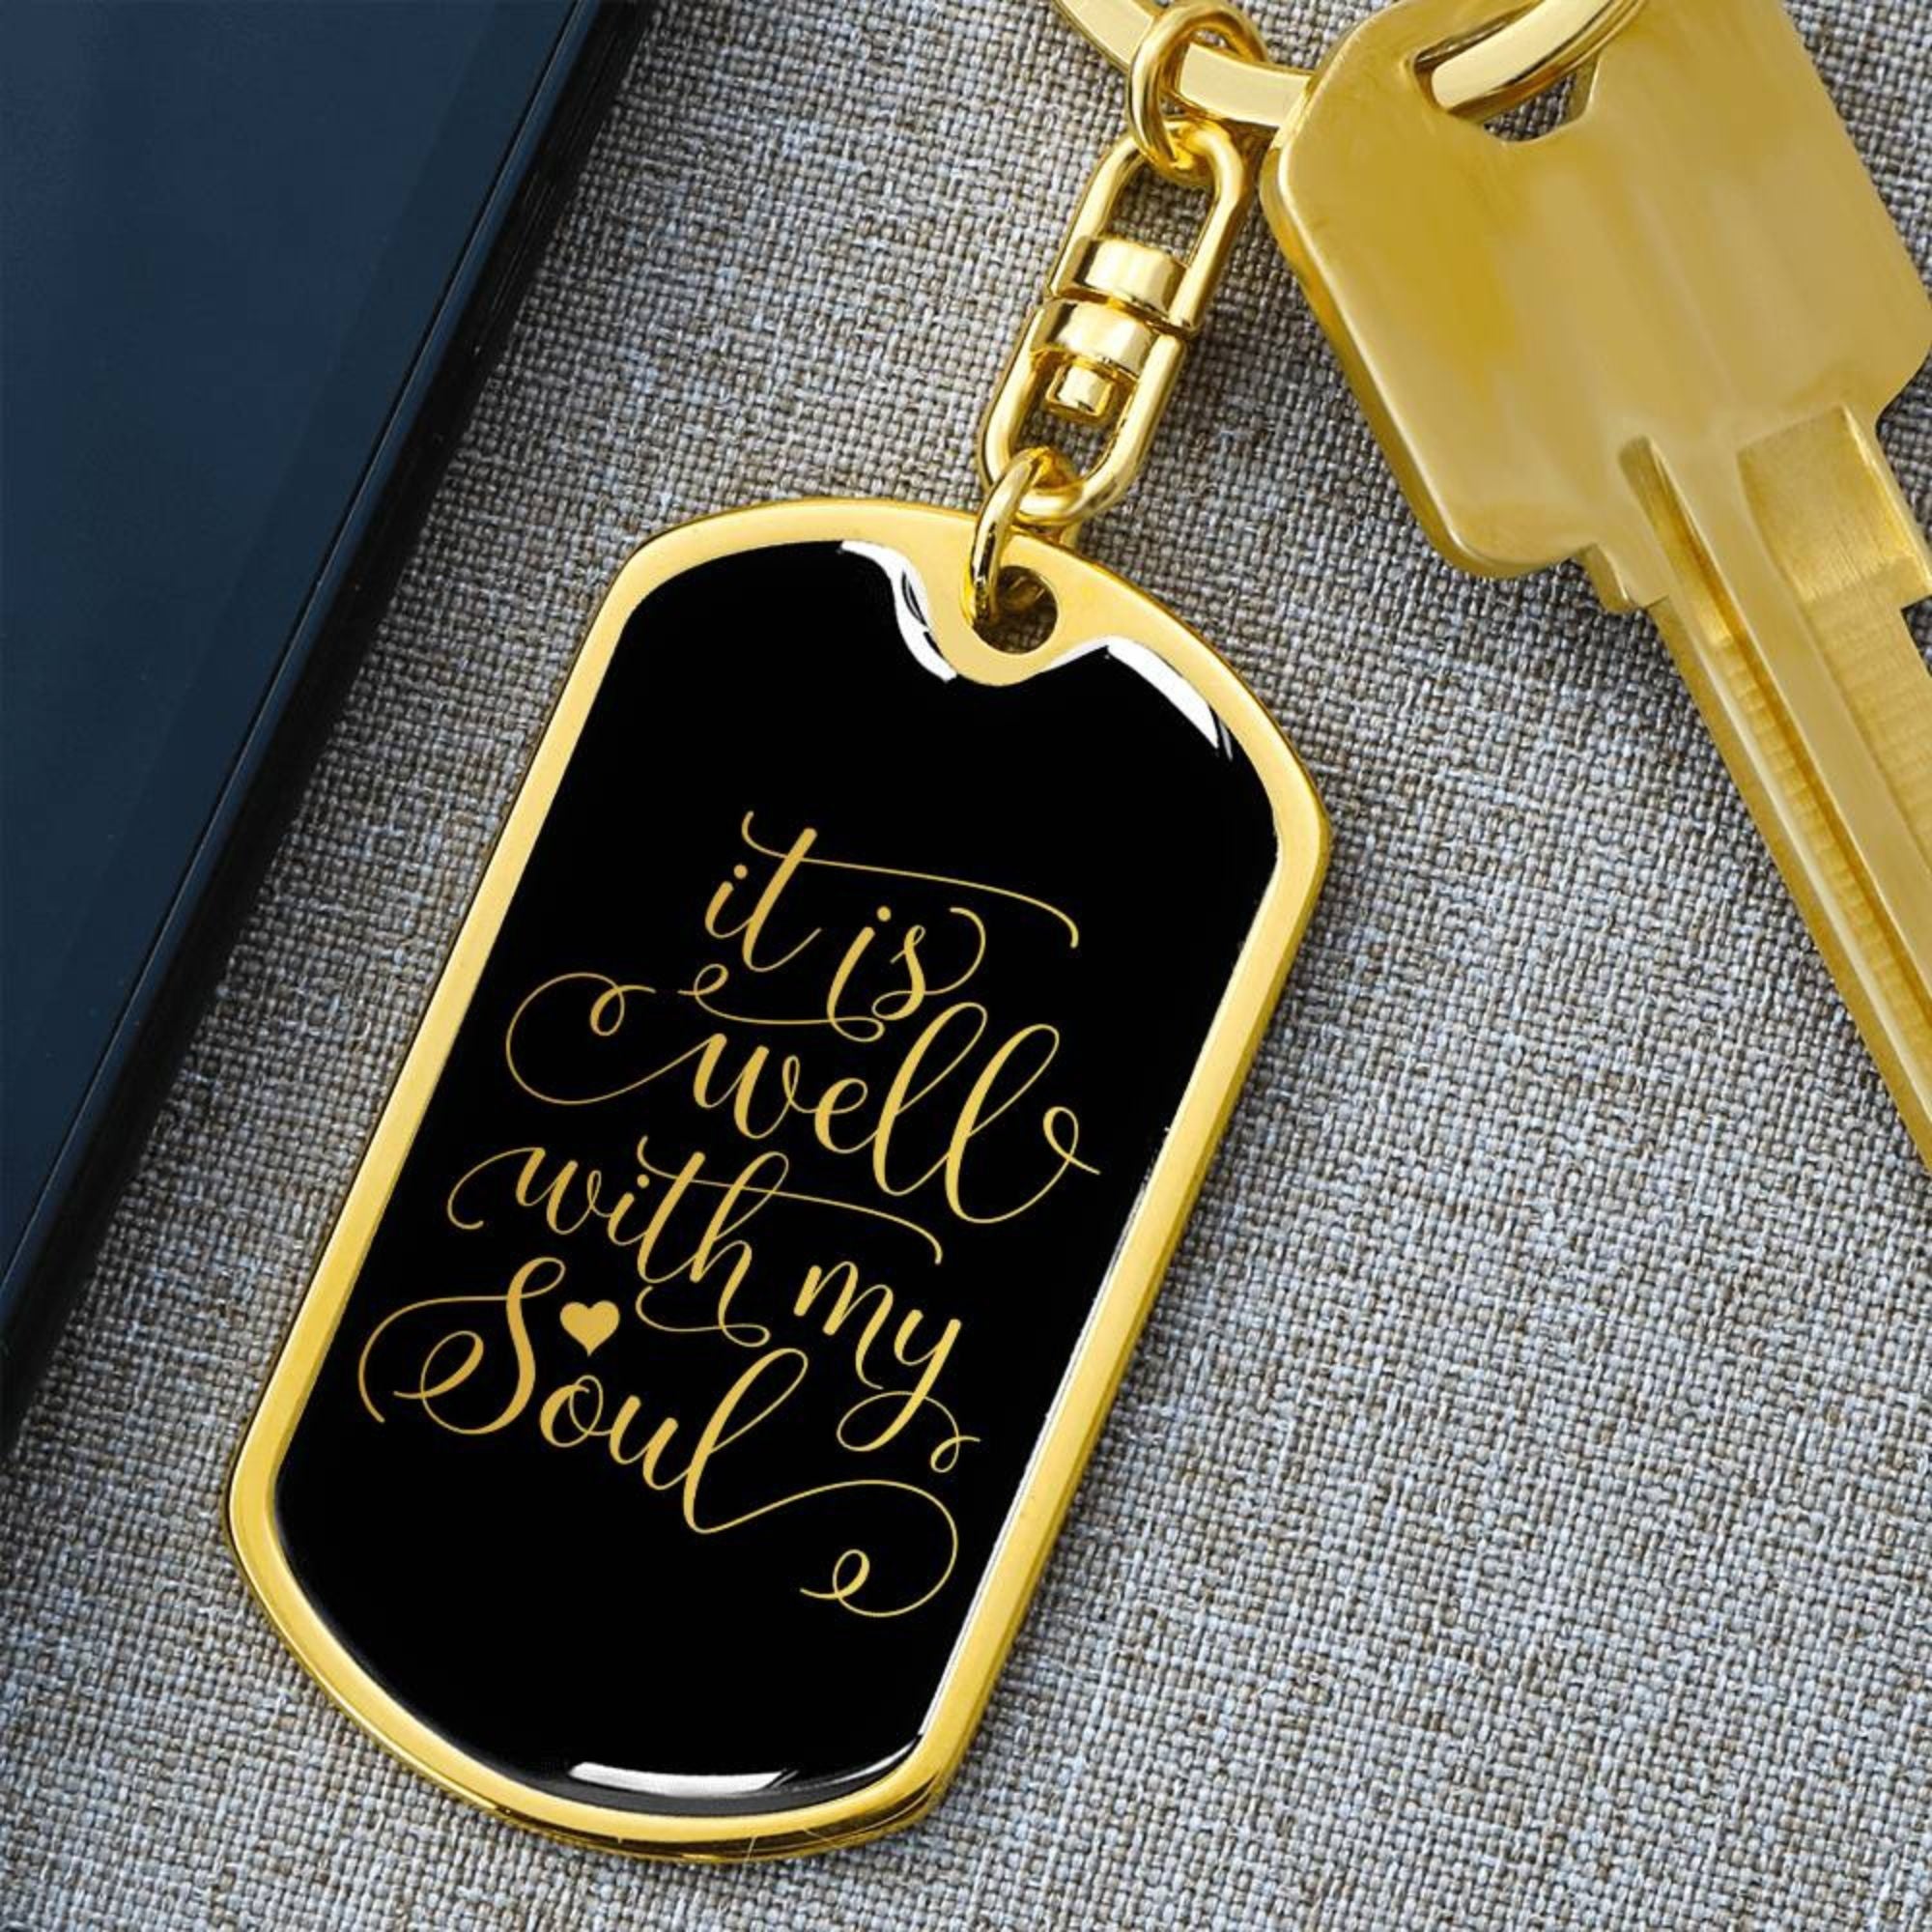 Well With My Soul - Gold Dog Tag with Swivel Keychain Engraving: No Jesus Passion Apparel